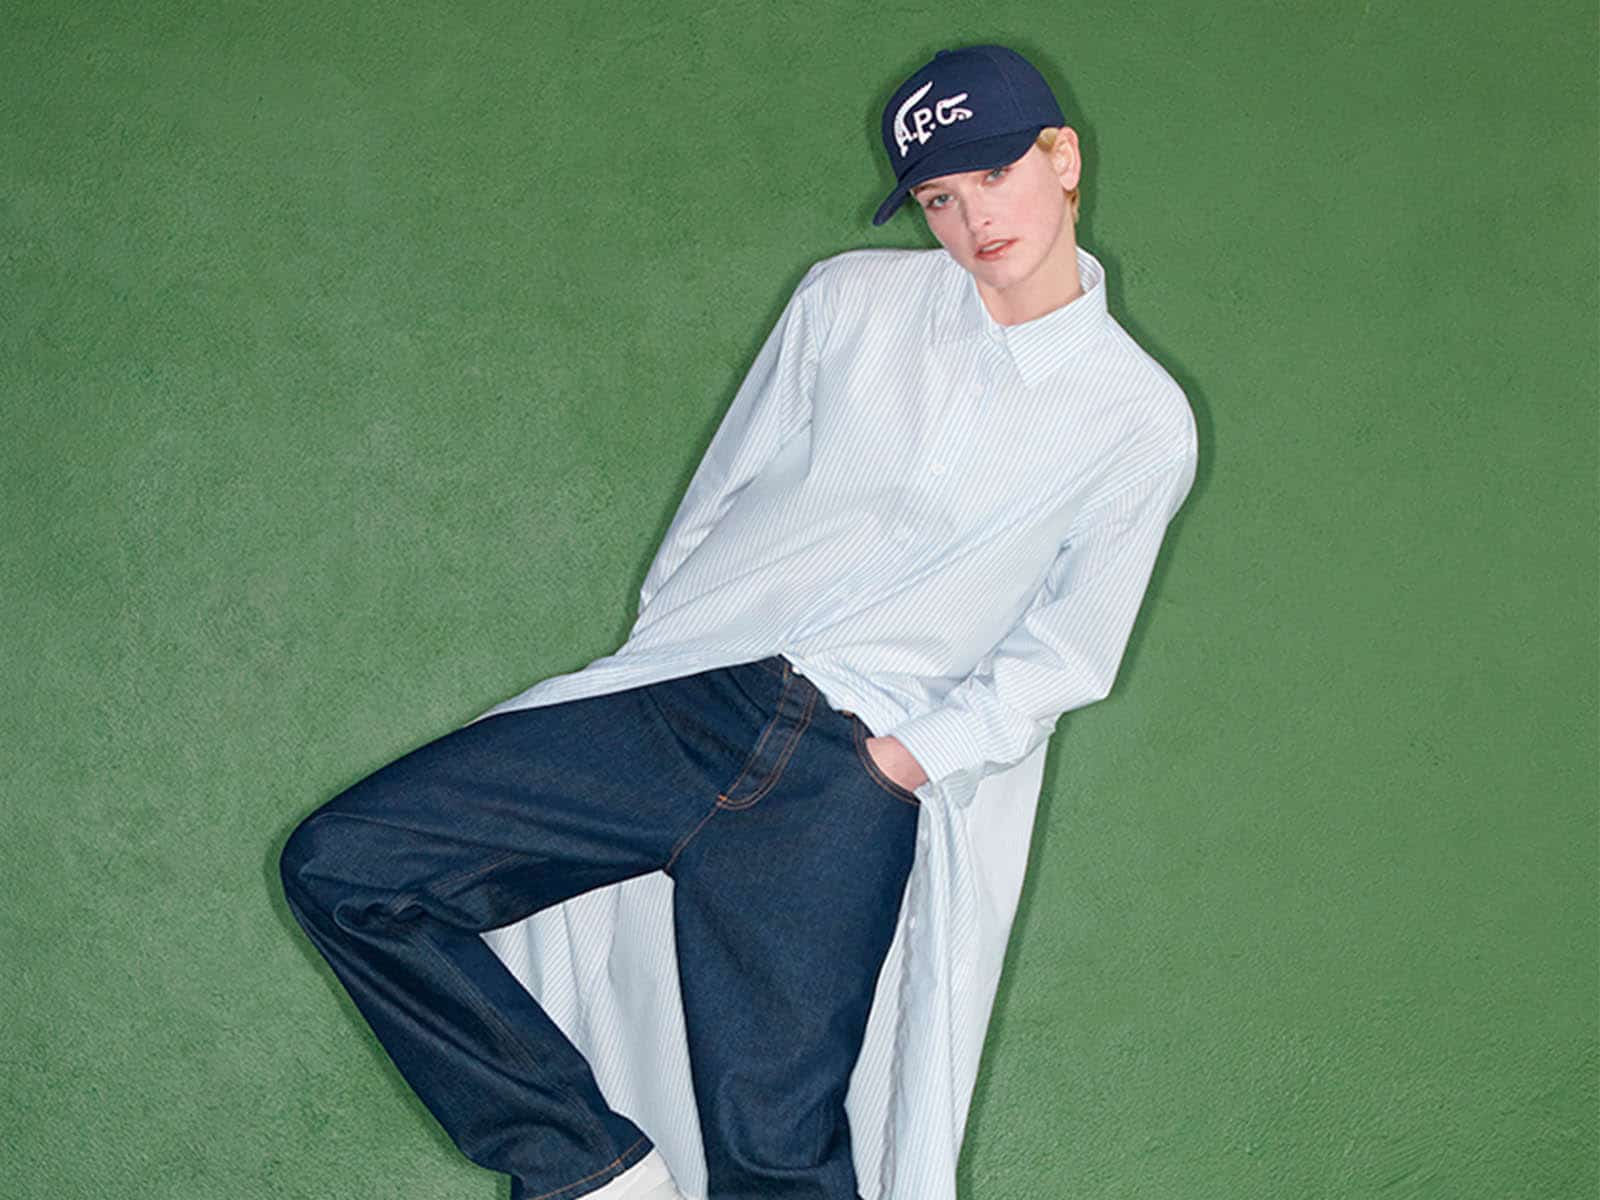 APC takes the Lacoste crocodile to another dimension